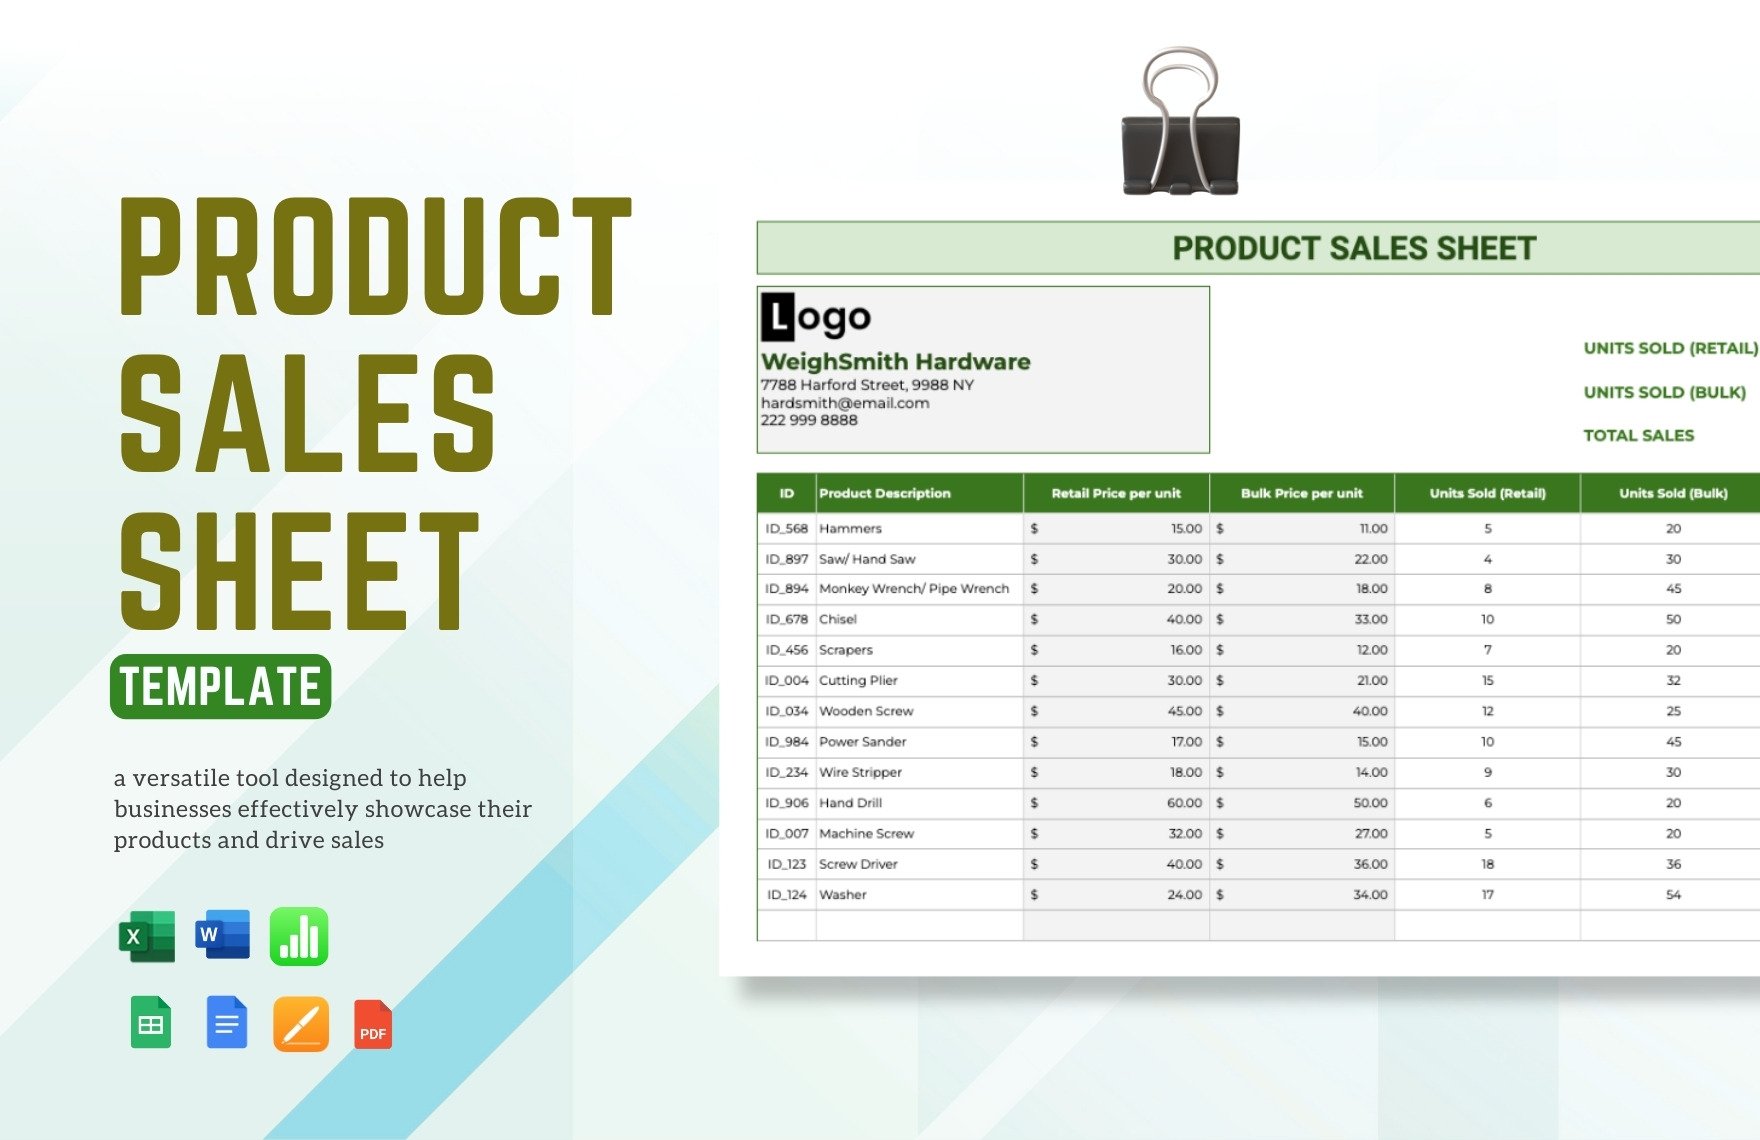 Product Sales Sheet Template in Word, Google Docs, Excel, PDF, Google Sheets, Apple Pages, Apple Numbers